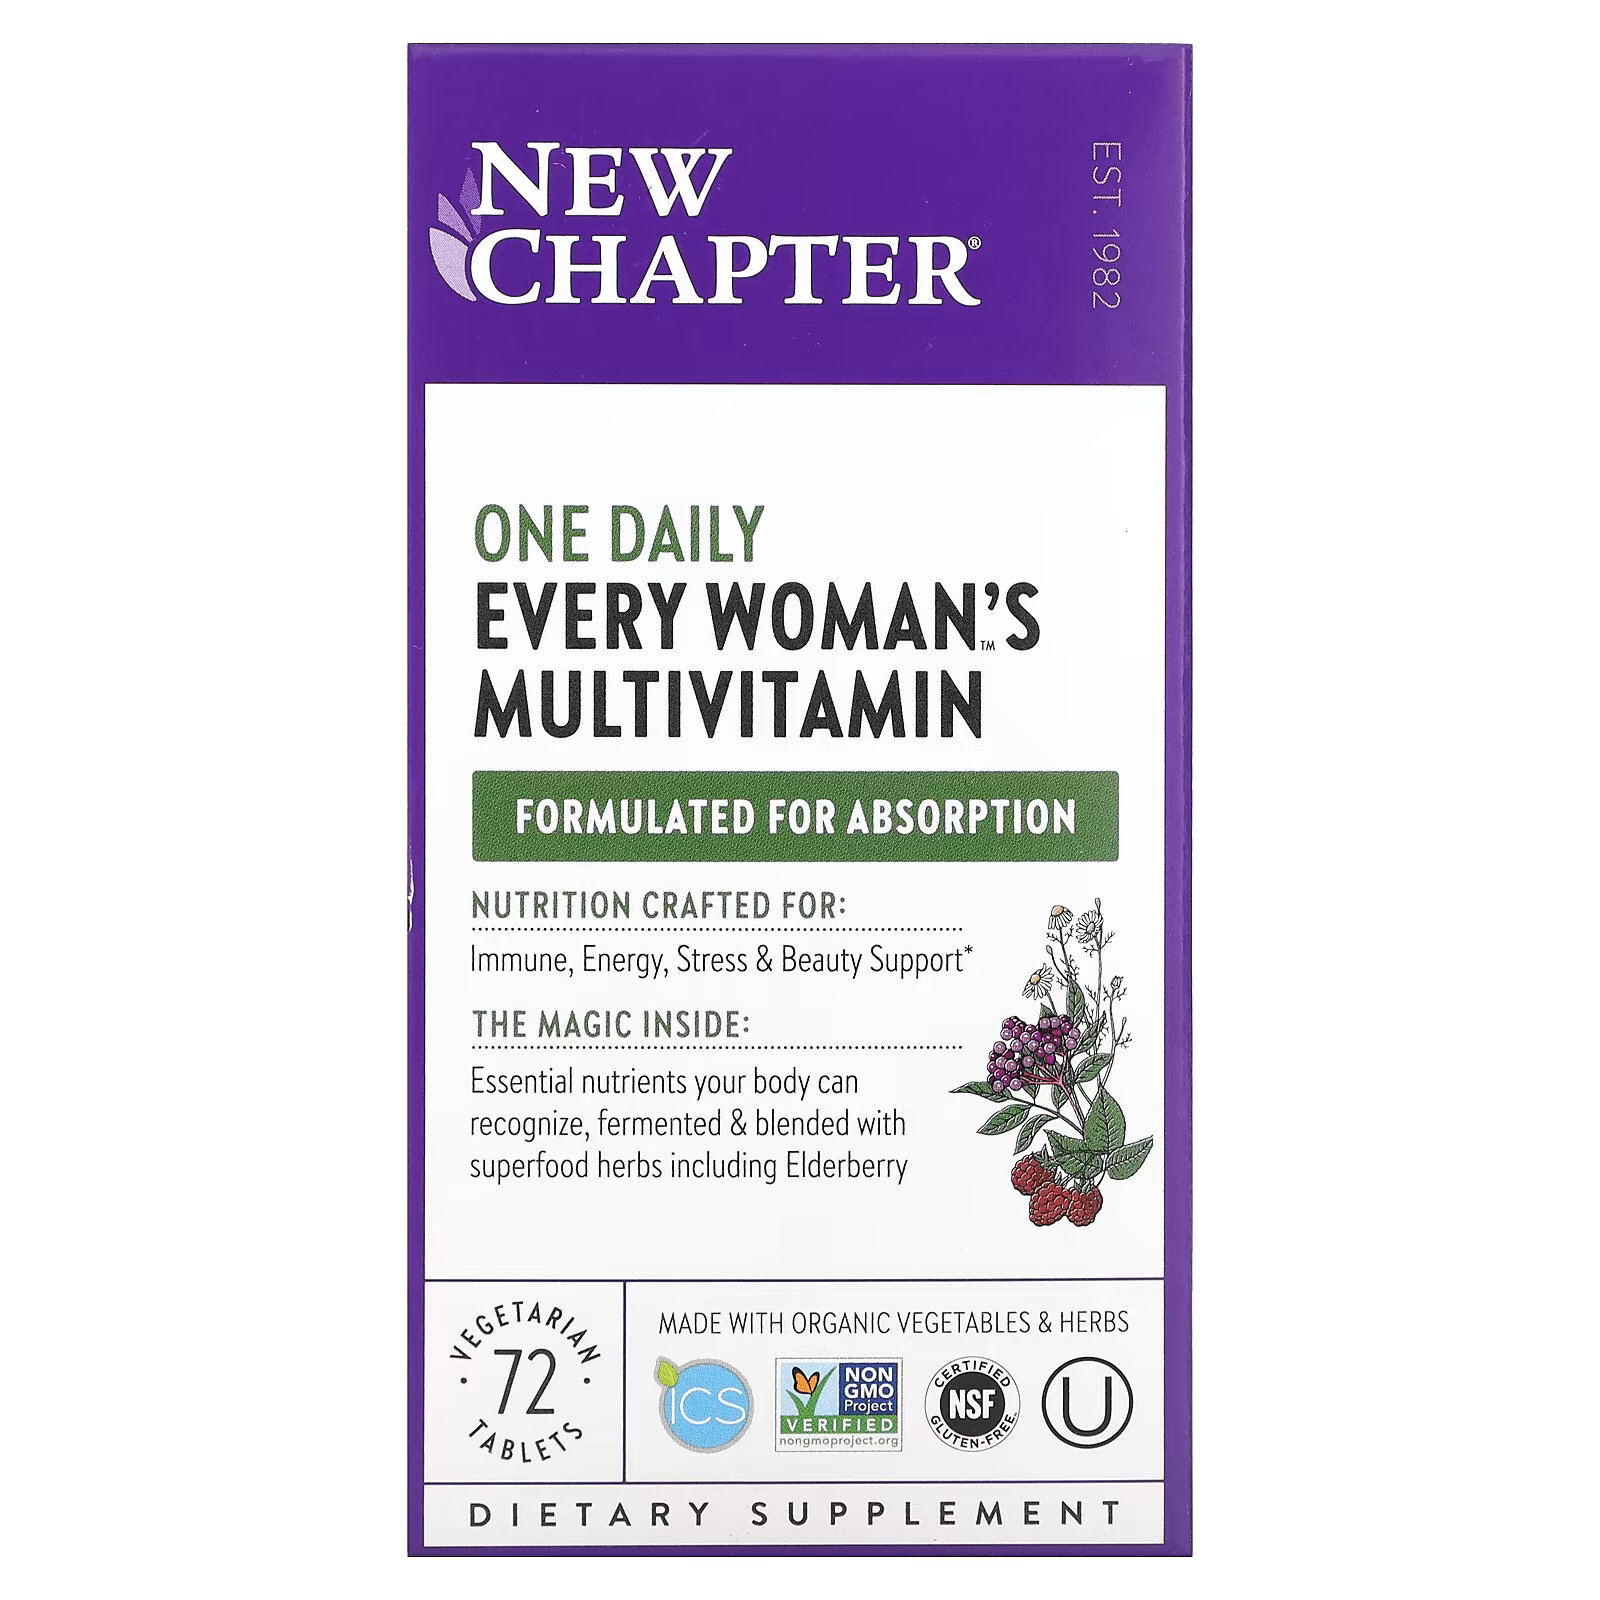 New Chapter, Every Woman's One Daily Multivitamin, 72 вегетарианские таблетки new chapter one daily prenatal multivitamin 35 30 вегетарианских таблеток